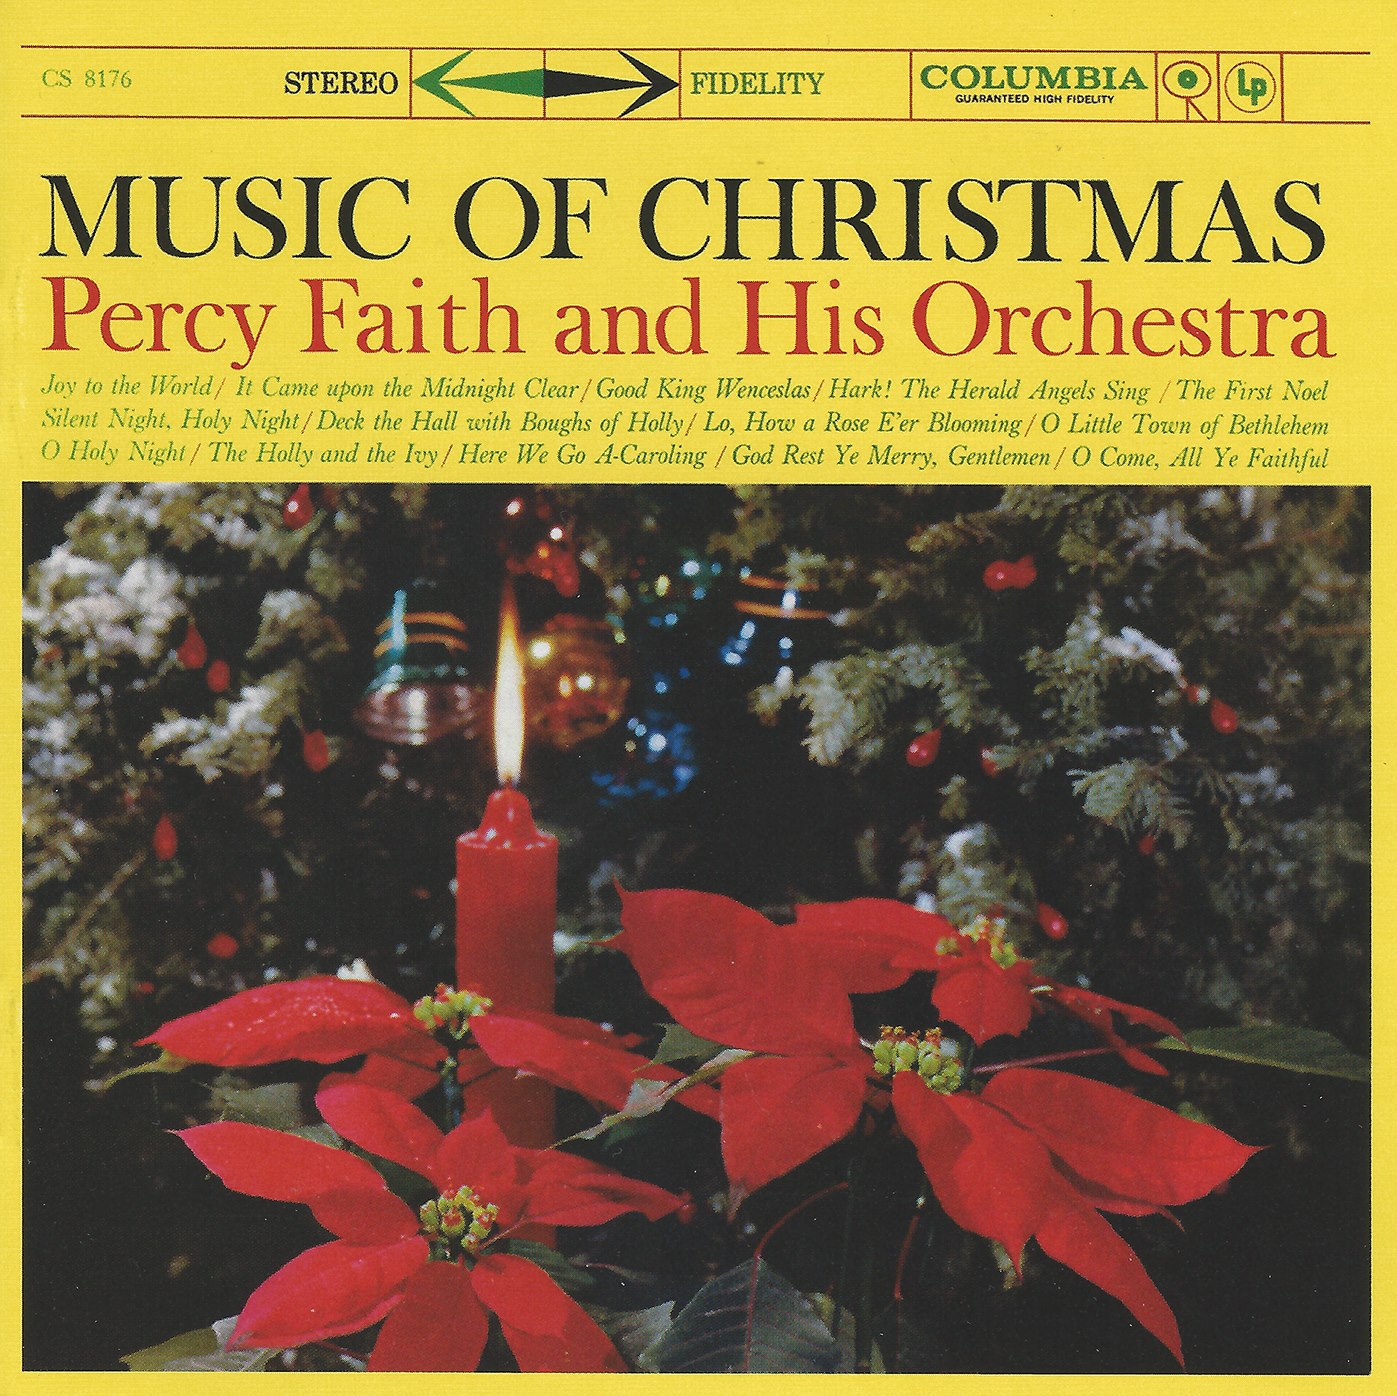 Percy Faith Music of Christmas (remastered)